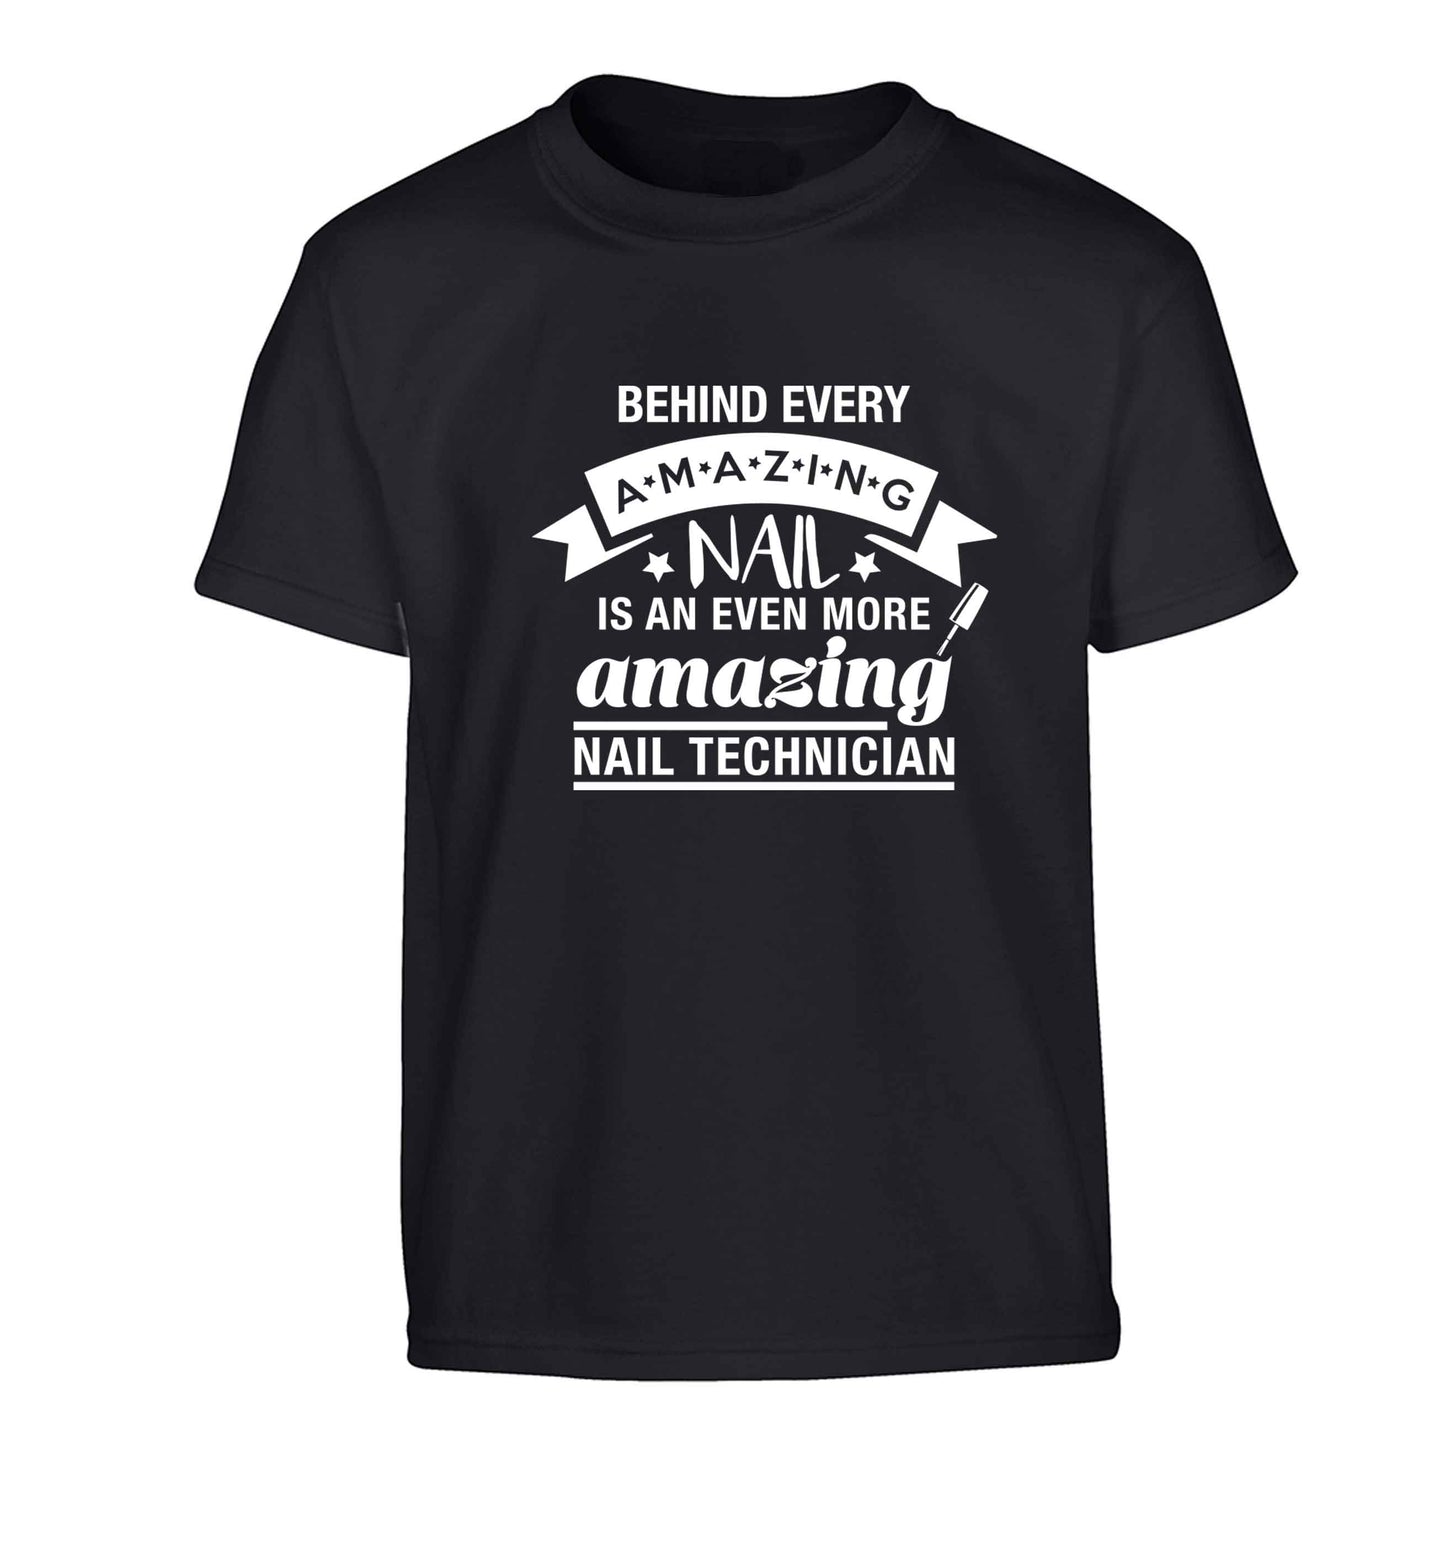 Behind every amazing nail is an even more amazing nail technician Children's black Tshirt 12-13 Years